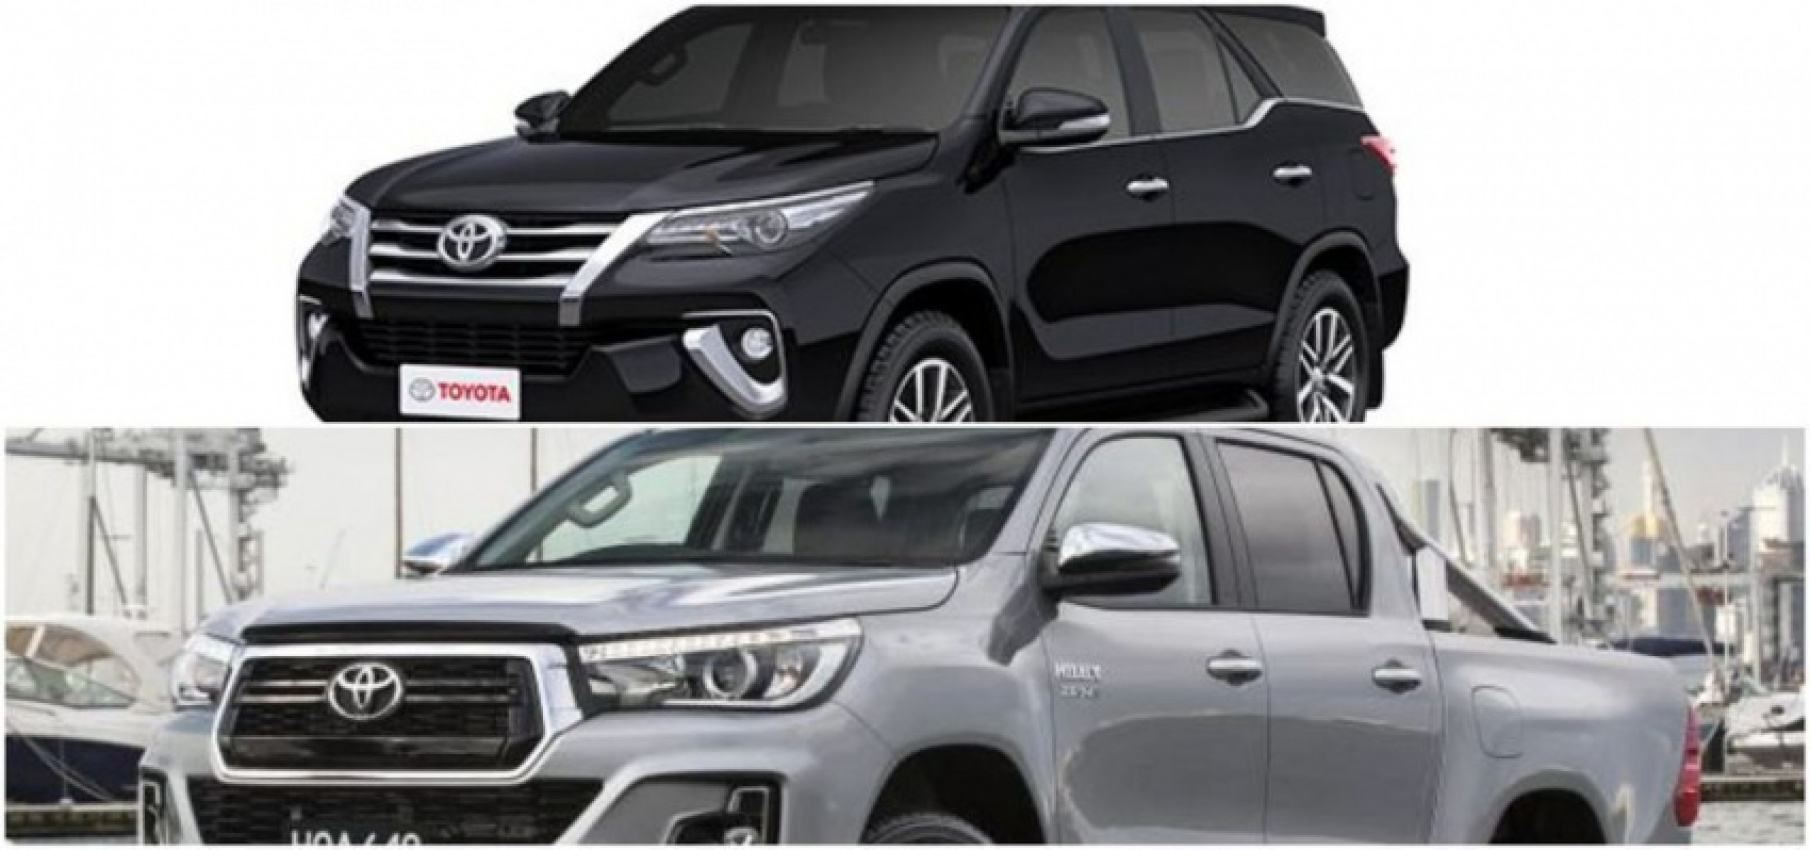 autos, cars, toyota, auto news, fortuner, toyota fortuner, toyota hilux, toyota motor sdn bhd, toyota malaysia issues recall for 2018-2019 hilux and fortuner over brake booster issue